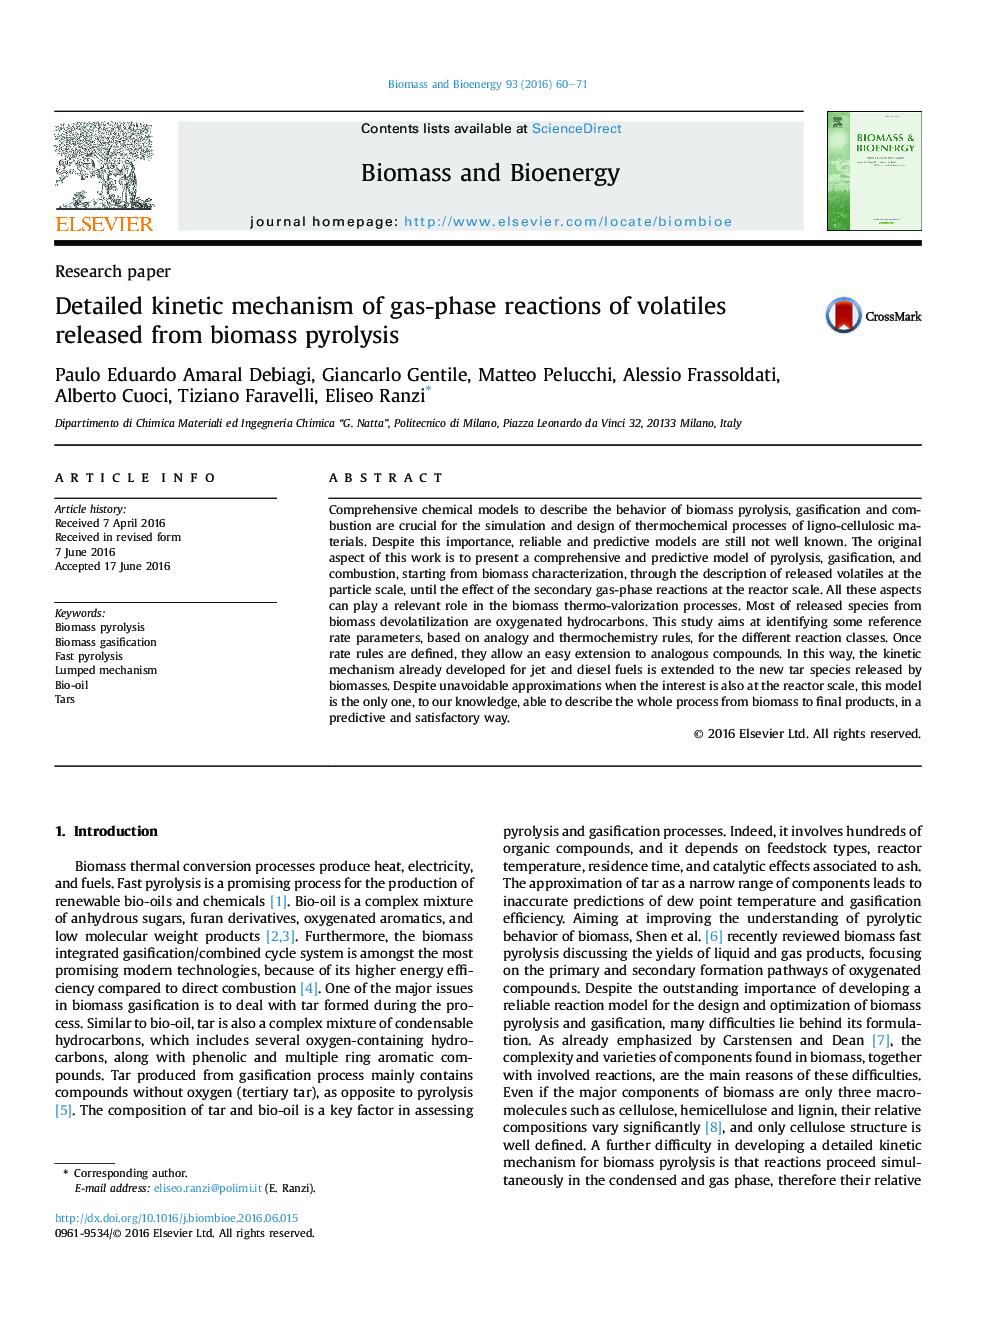 Detailed kinetic mechanism of gas-phase reactions of volatiles released from biomass pyrolysis